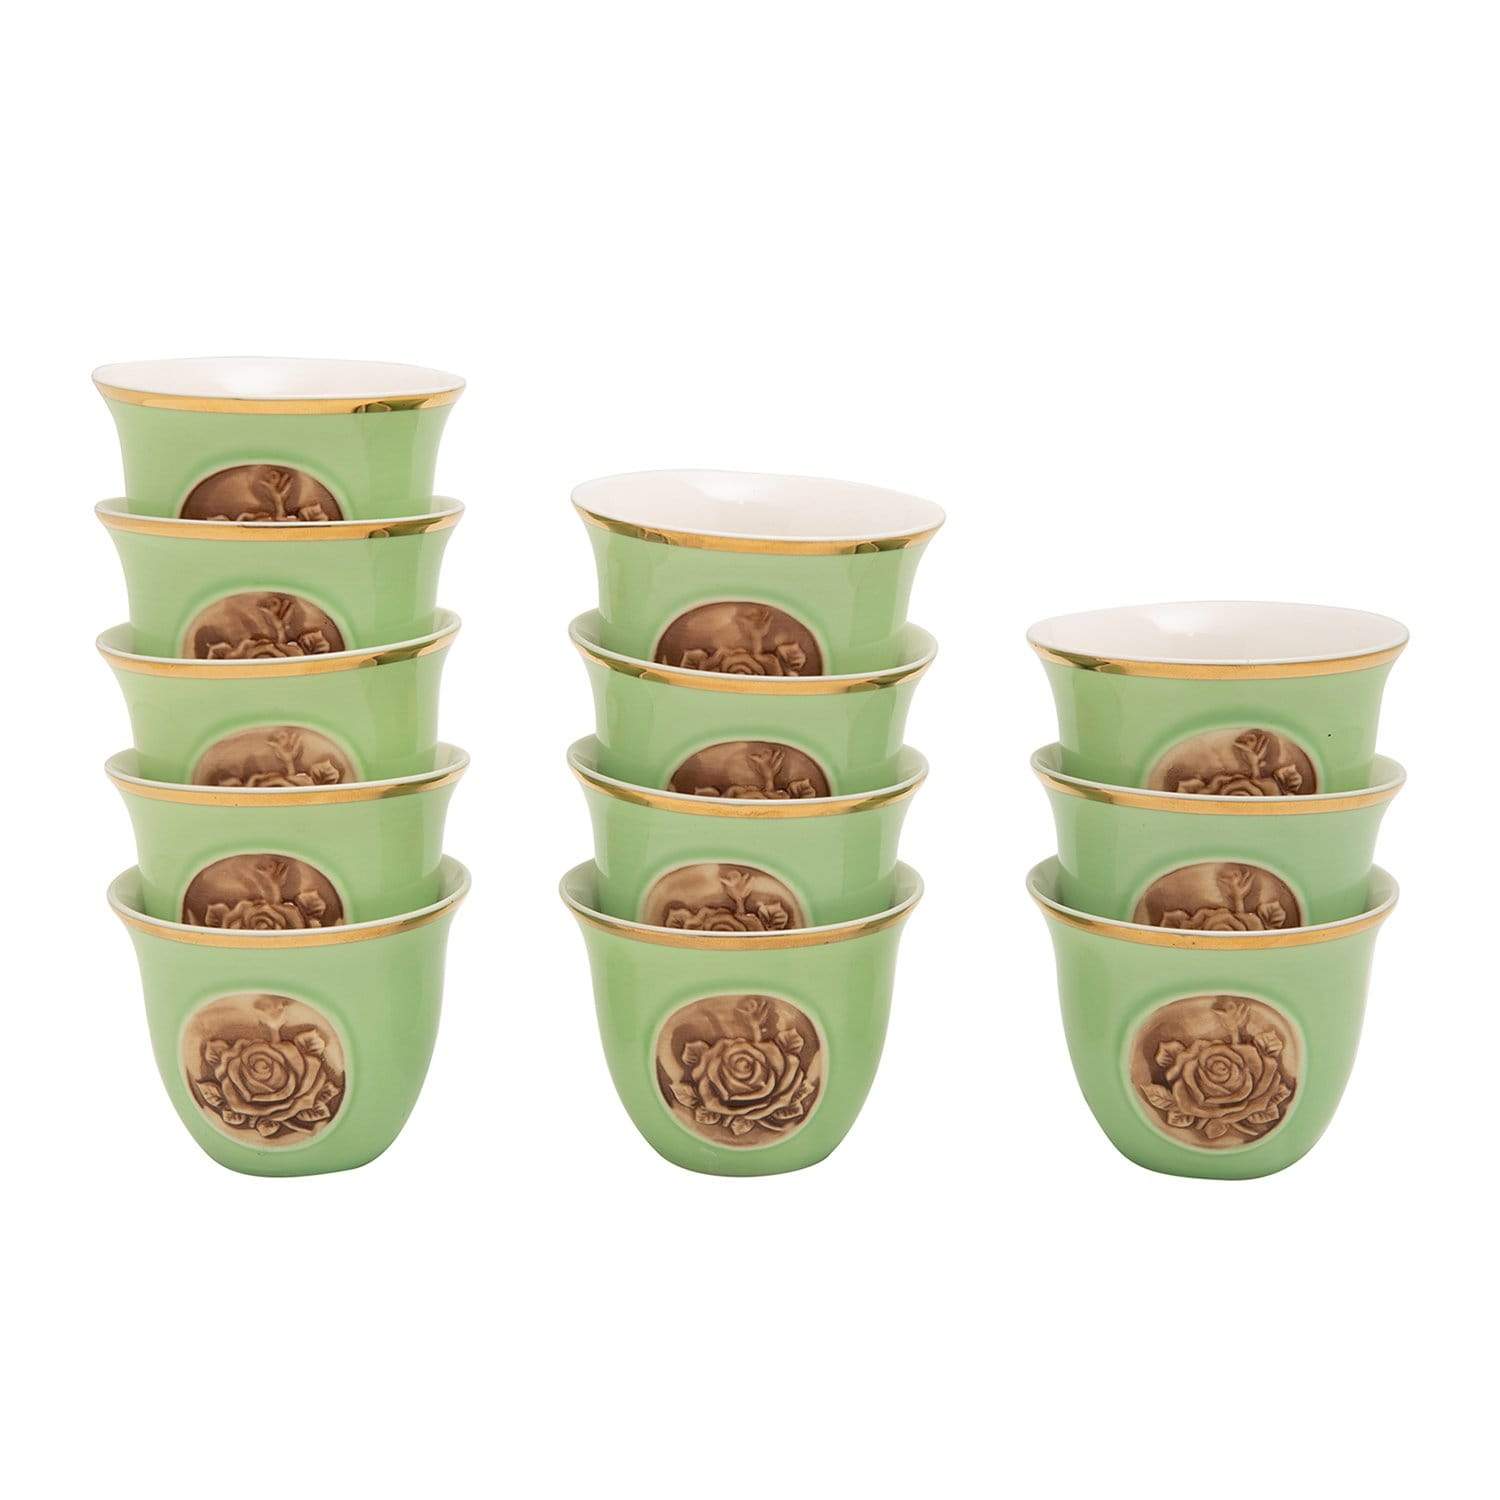 BANBERRY PORCELAIN 12PC CAWA CUPS BC GRN GOLD LINE - SC012B